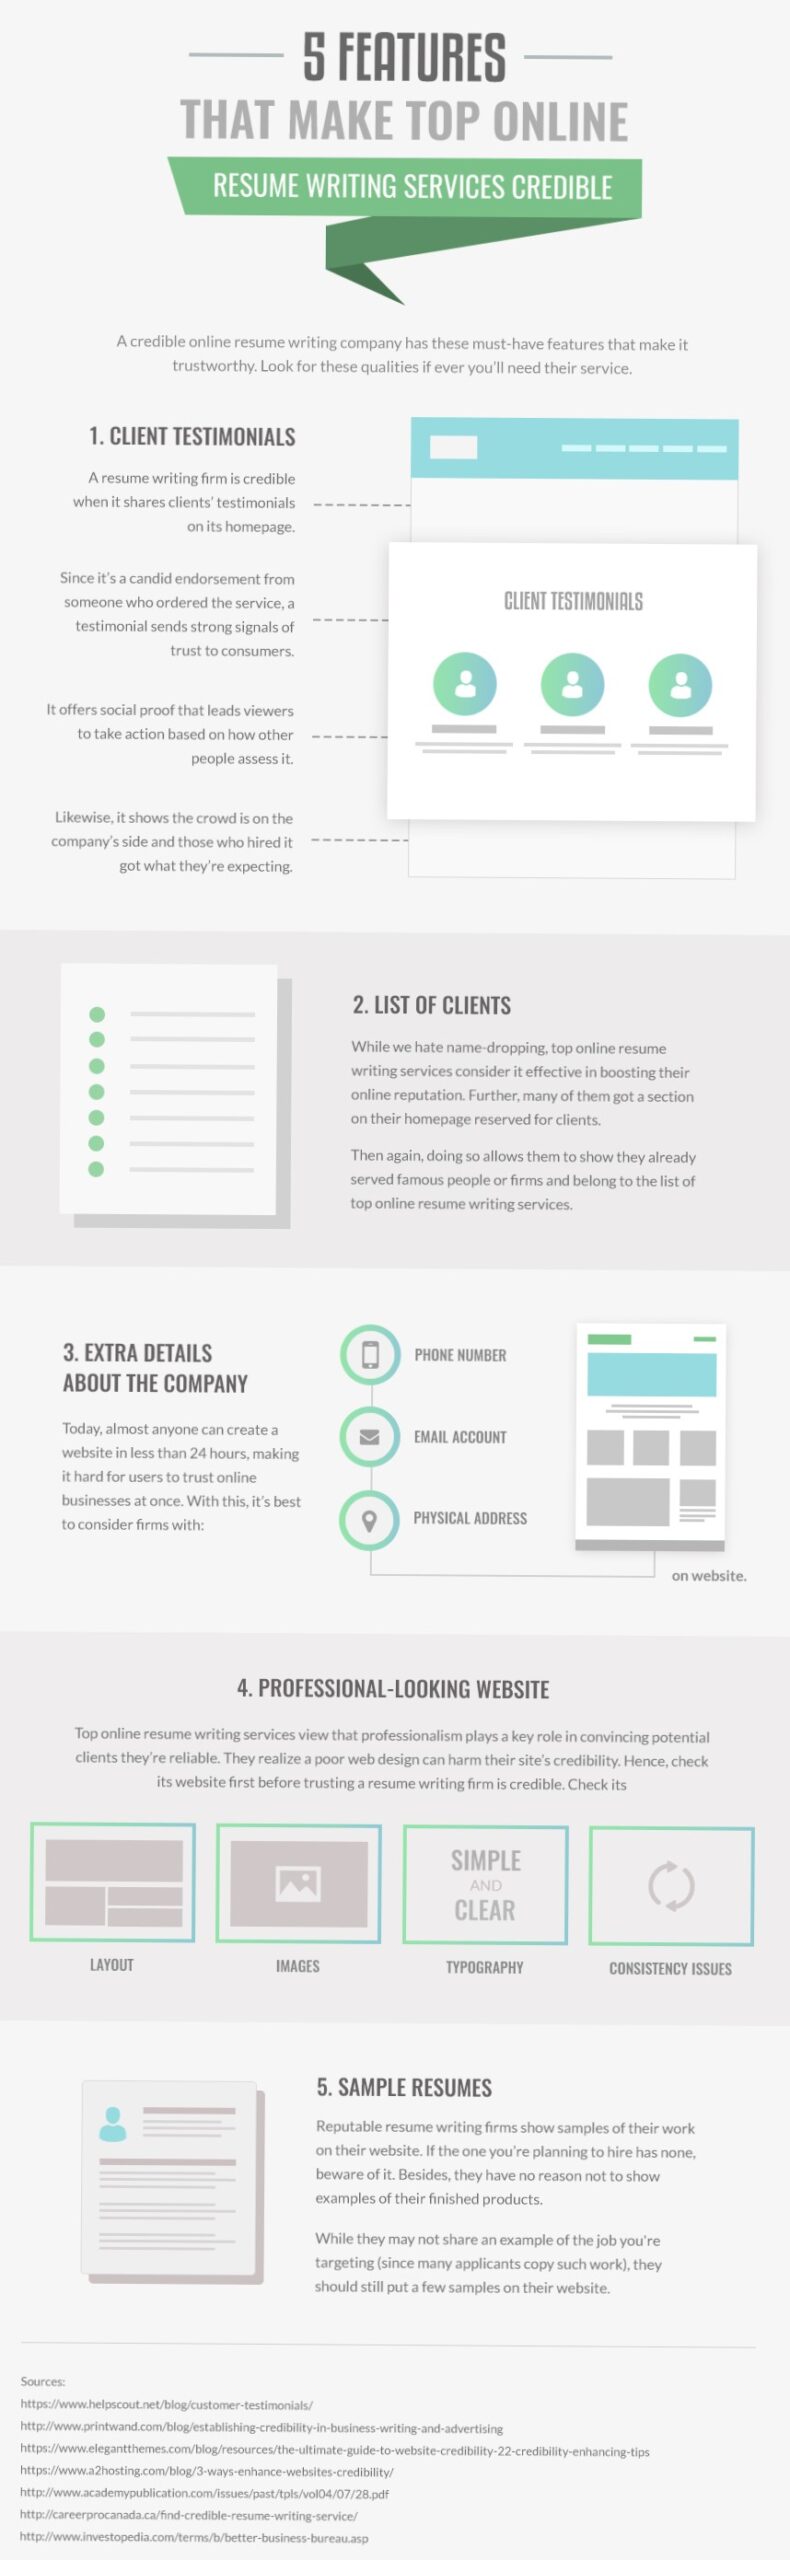 infographic showing five features that make top online resume writing services credible